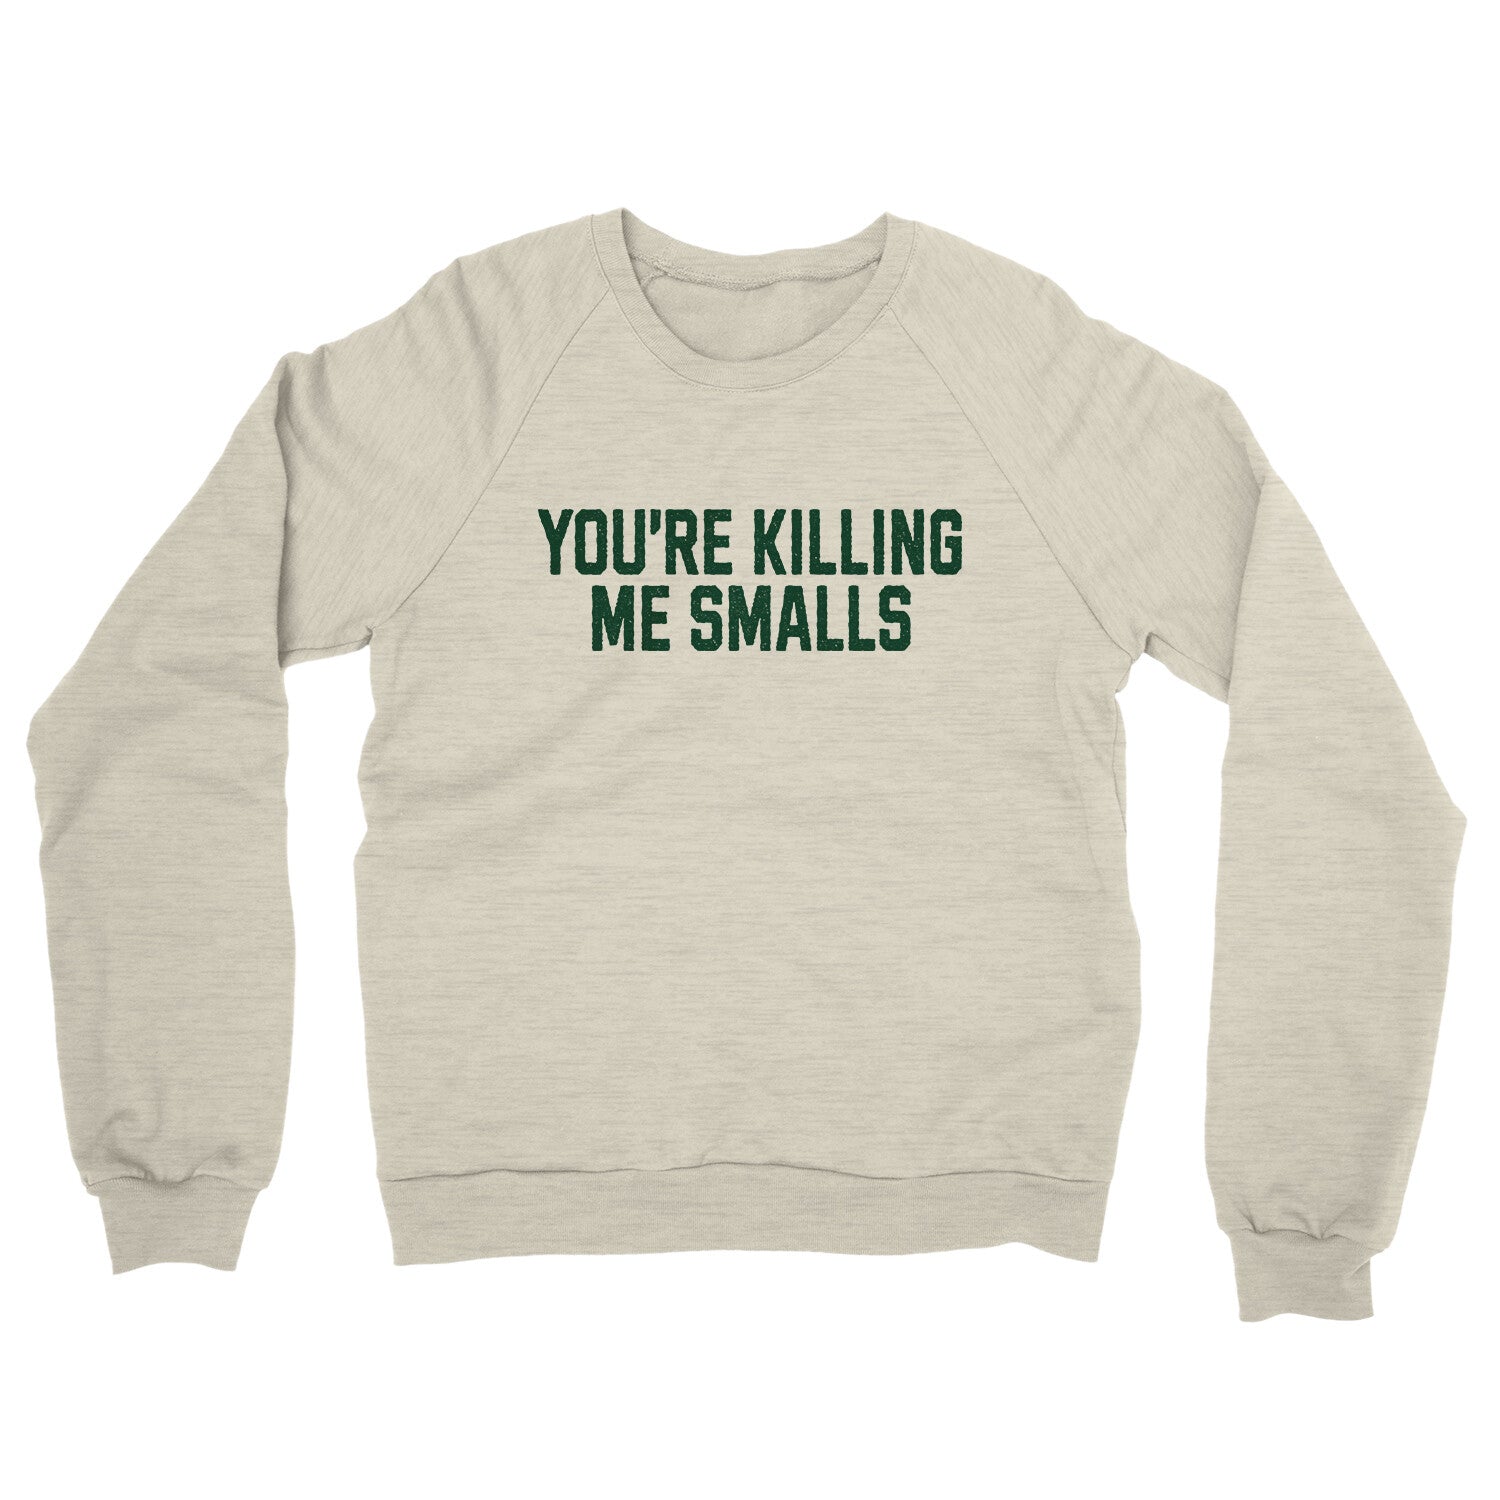 You're Killing me Smalls in Heather Oatmeal Color